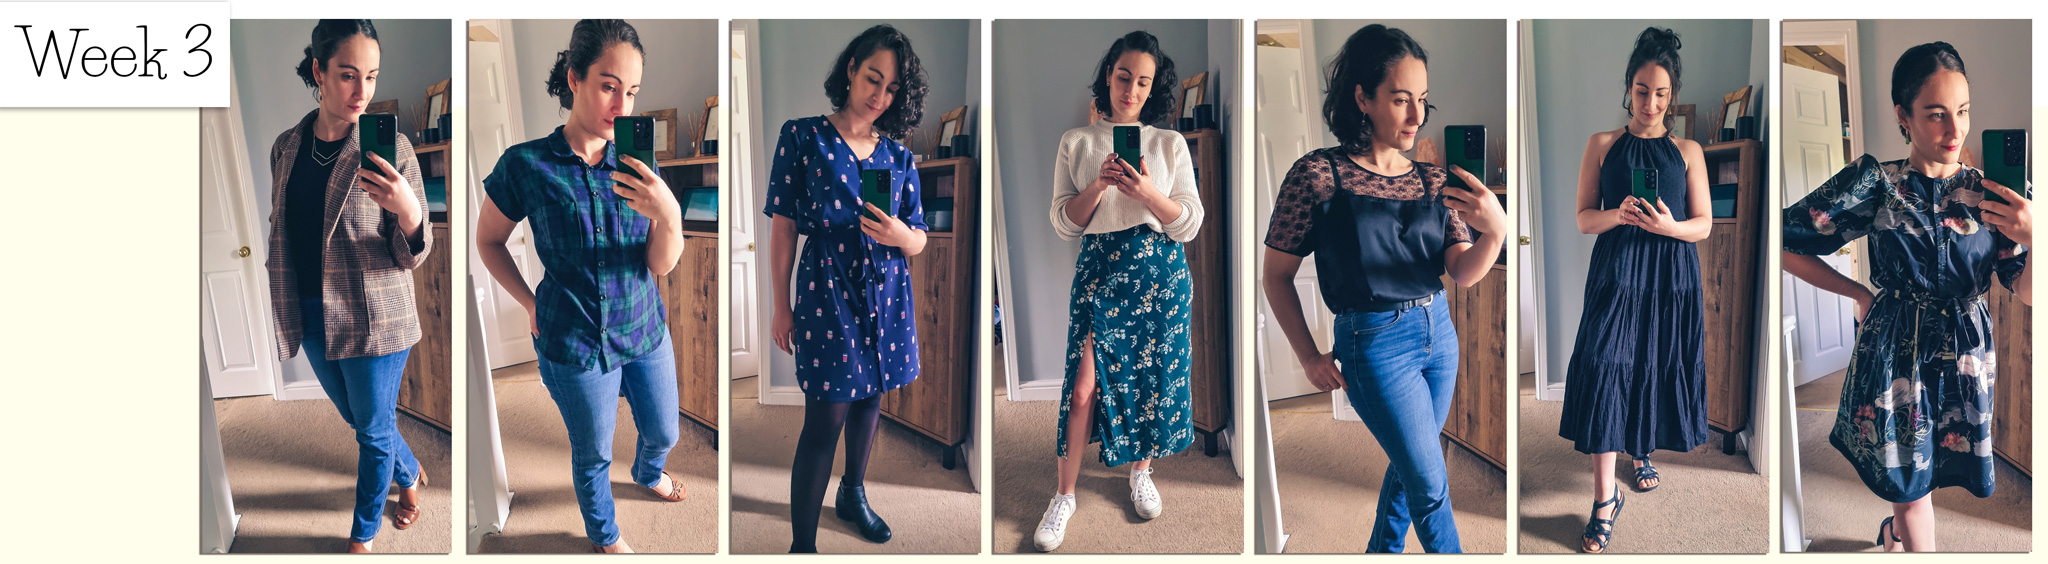 LuLaRoe Carly Dress. How five different sizes fit one person.